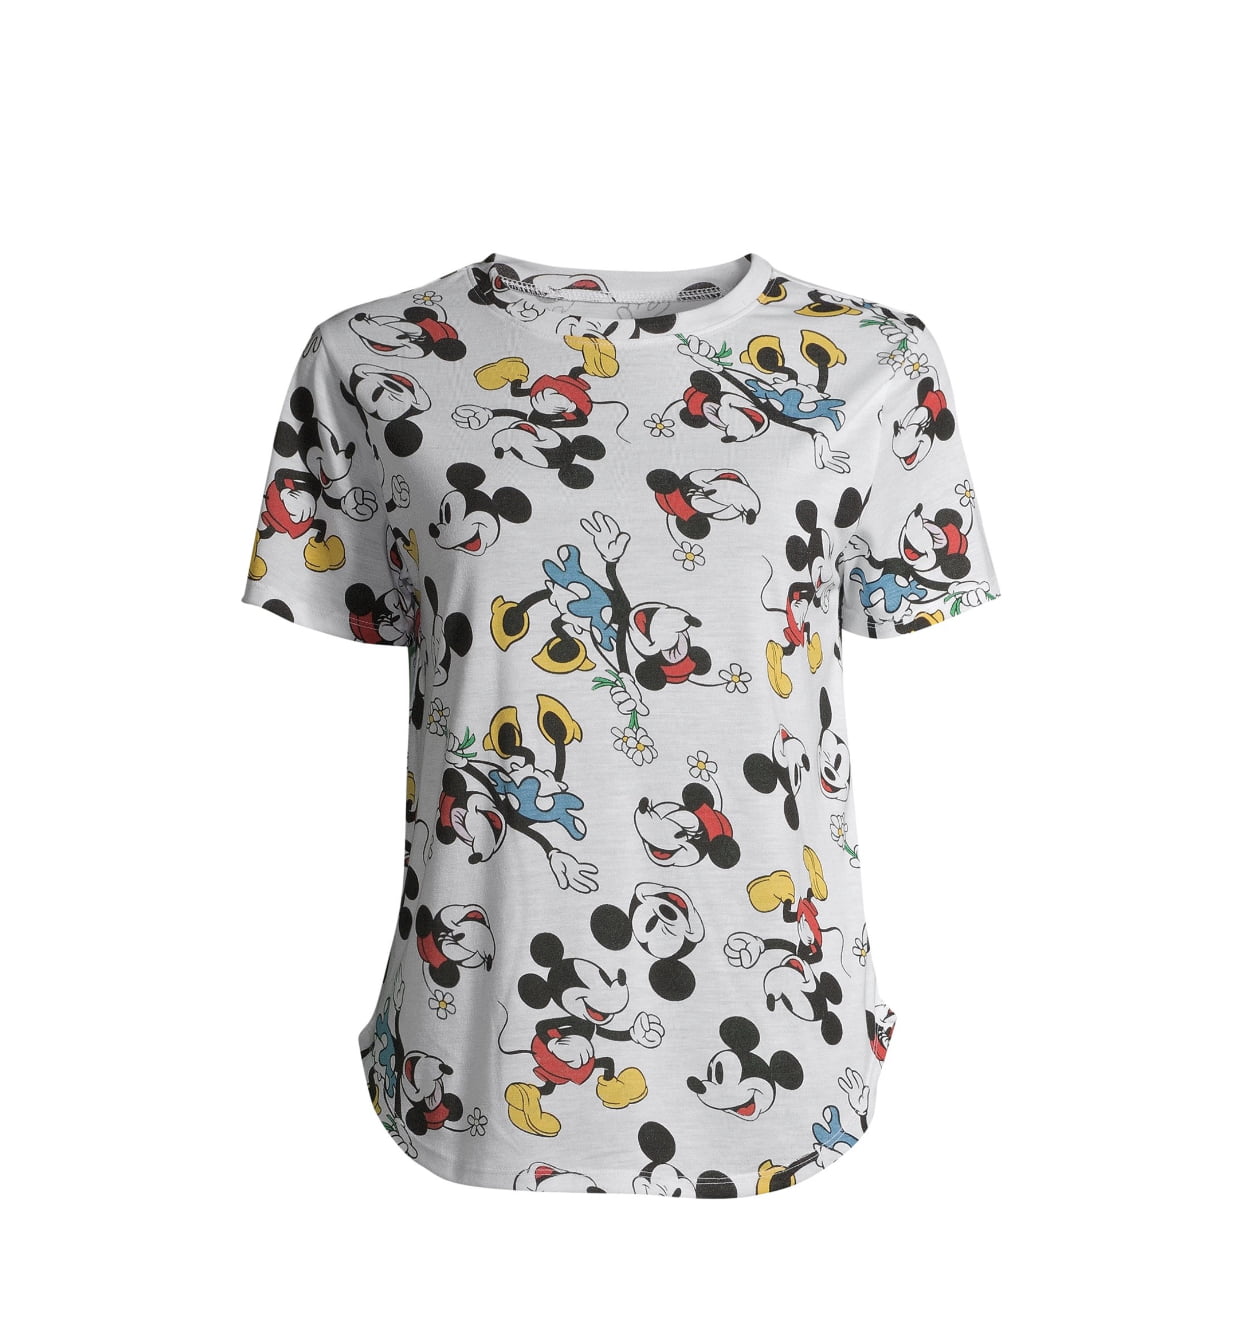 10 Cute Disney Finds from Walmart | January 2021 – BRB Going to Disney